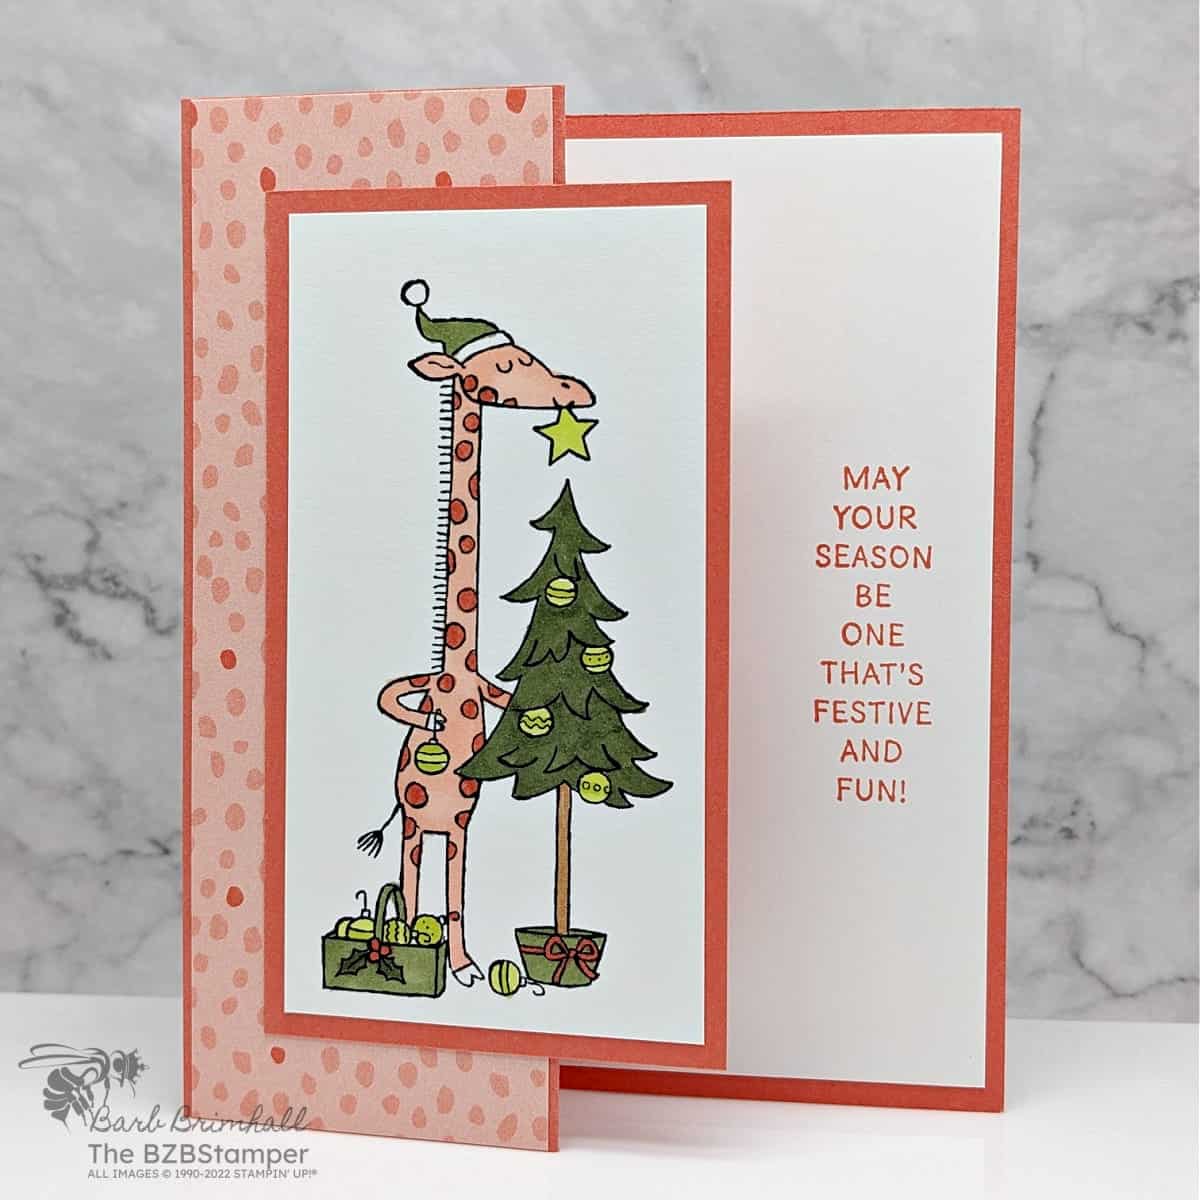 Orange and green Christmas card featuring a giraffee with the sentiment "May your season be one that's festive and fun."